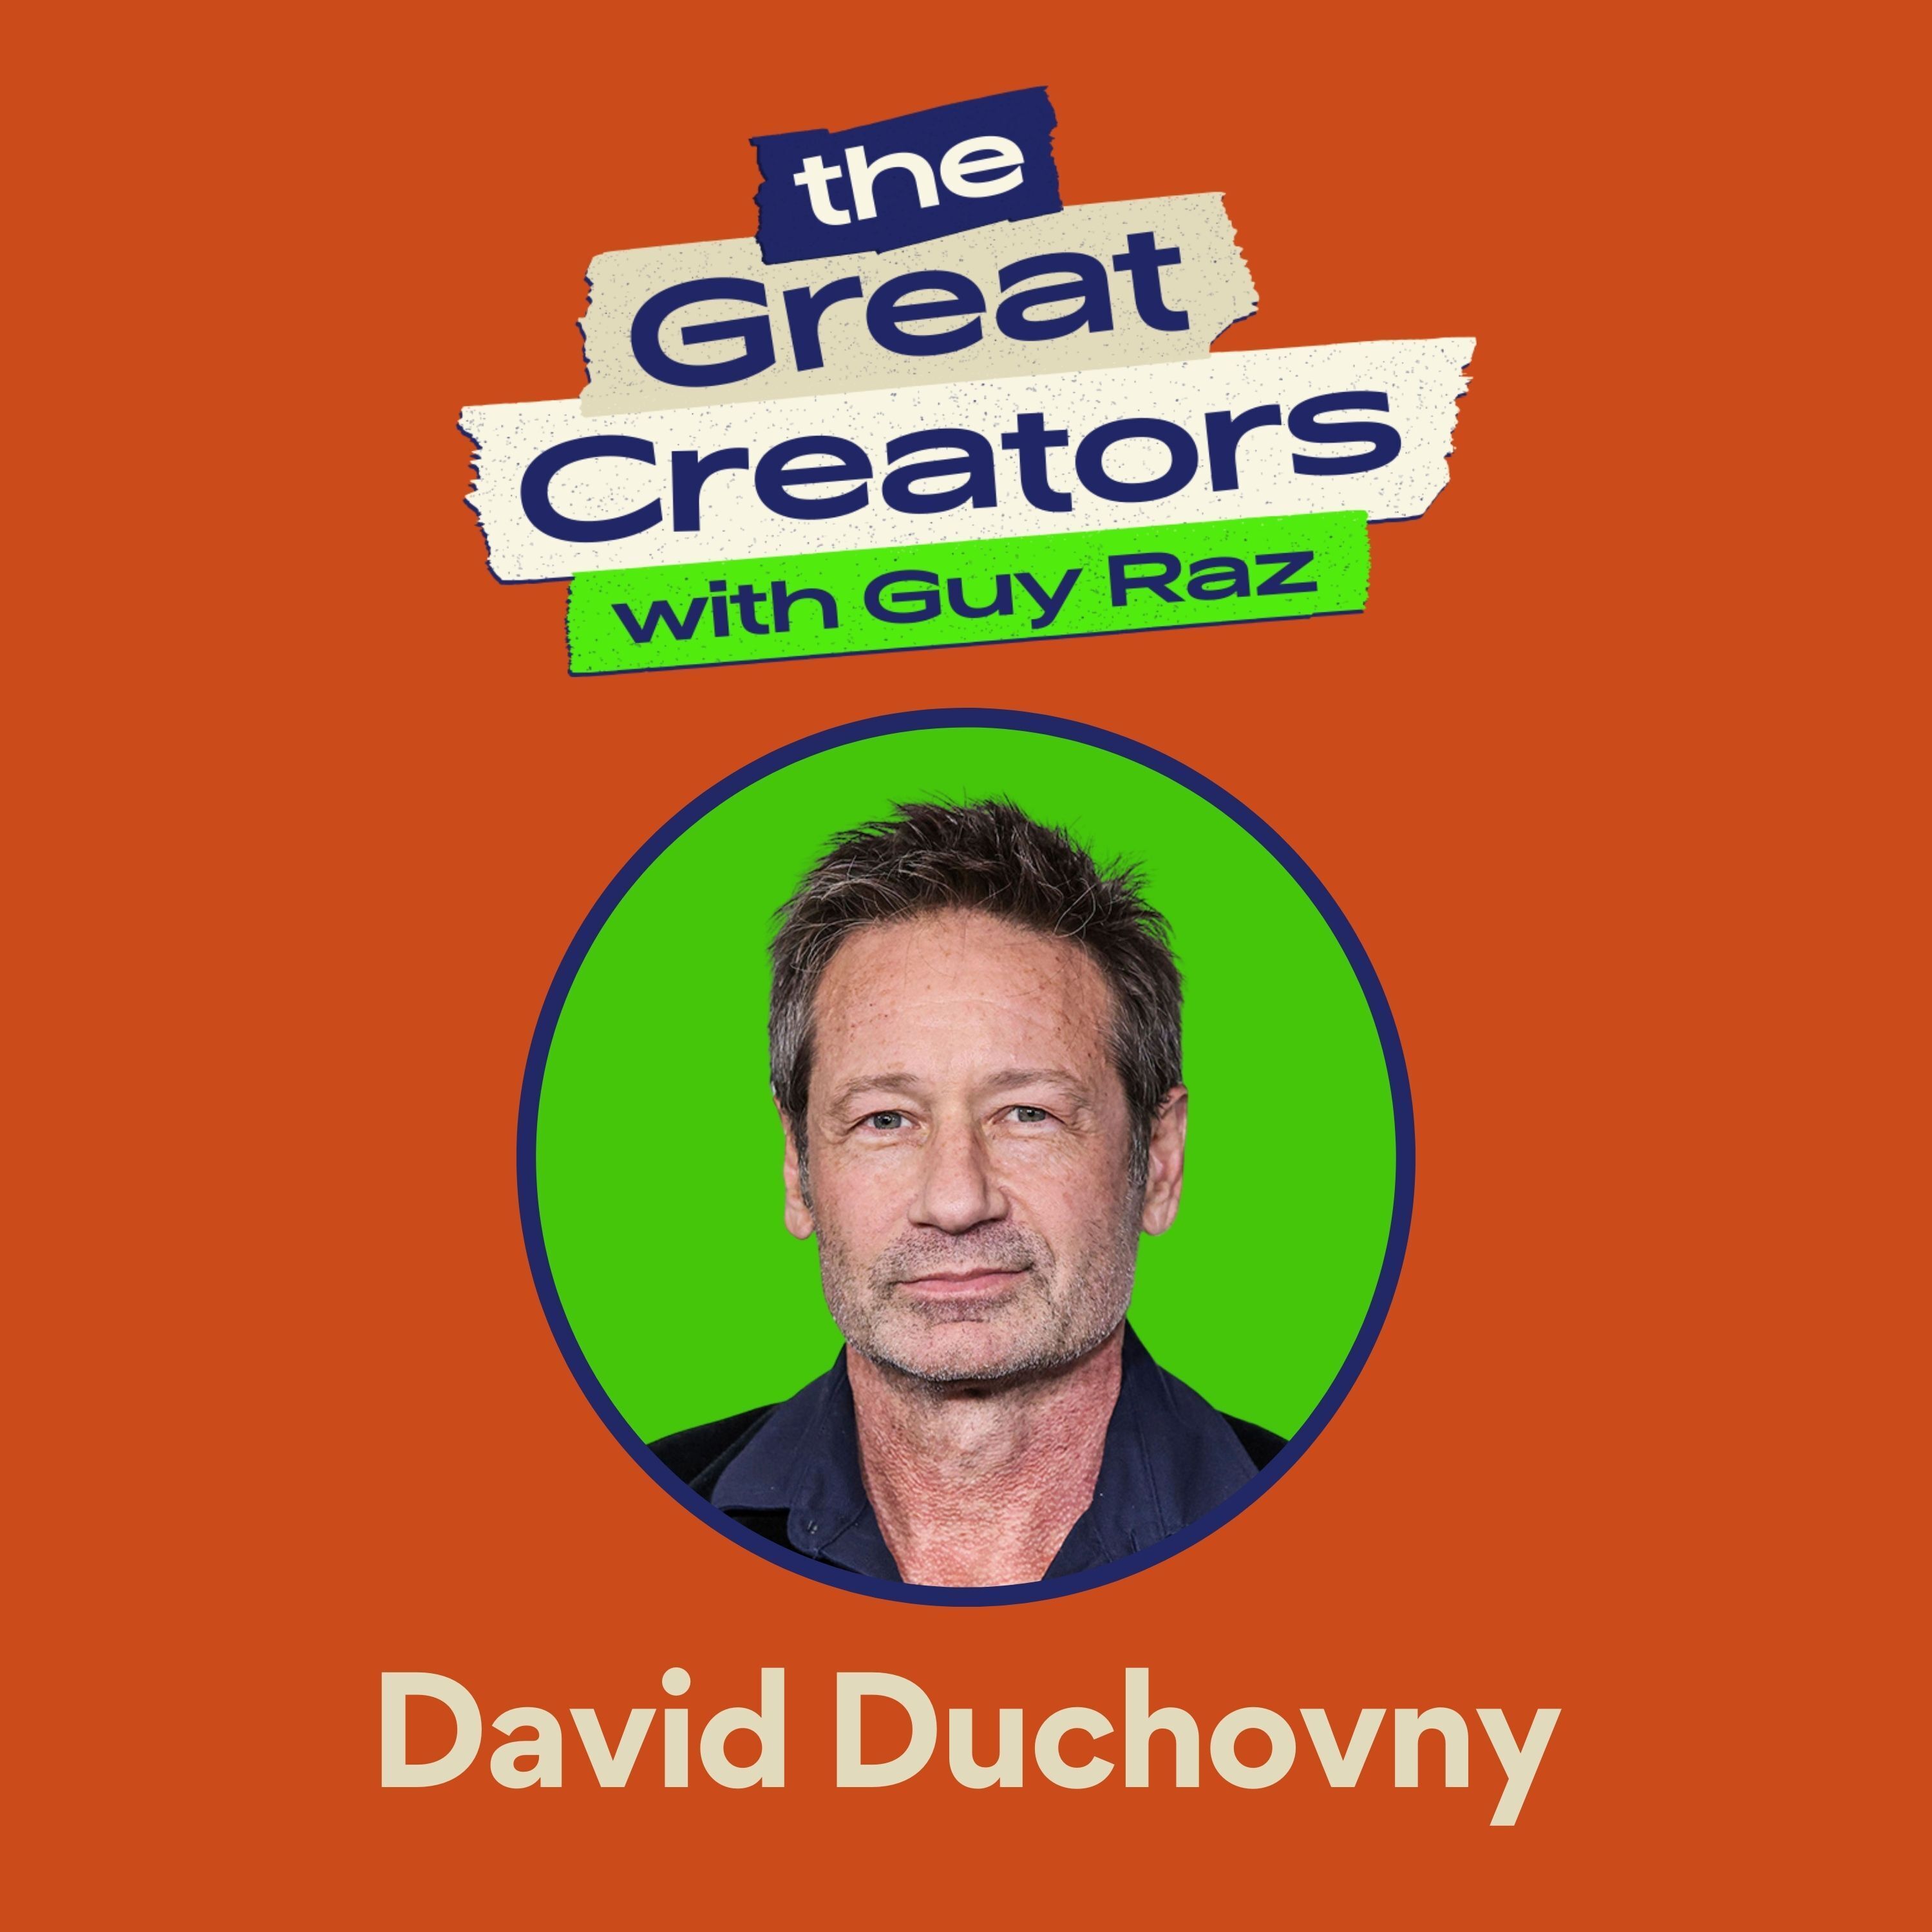 David Duchovny: His Journey from PhD Student to The X-Files, Why He Writes Novels and Music, and Failure as a 